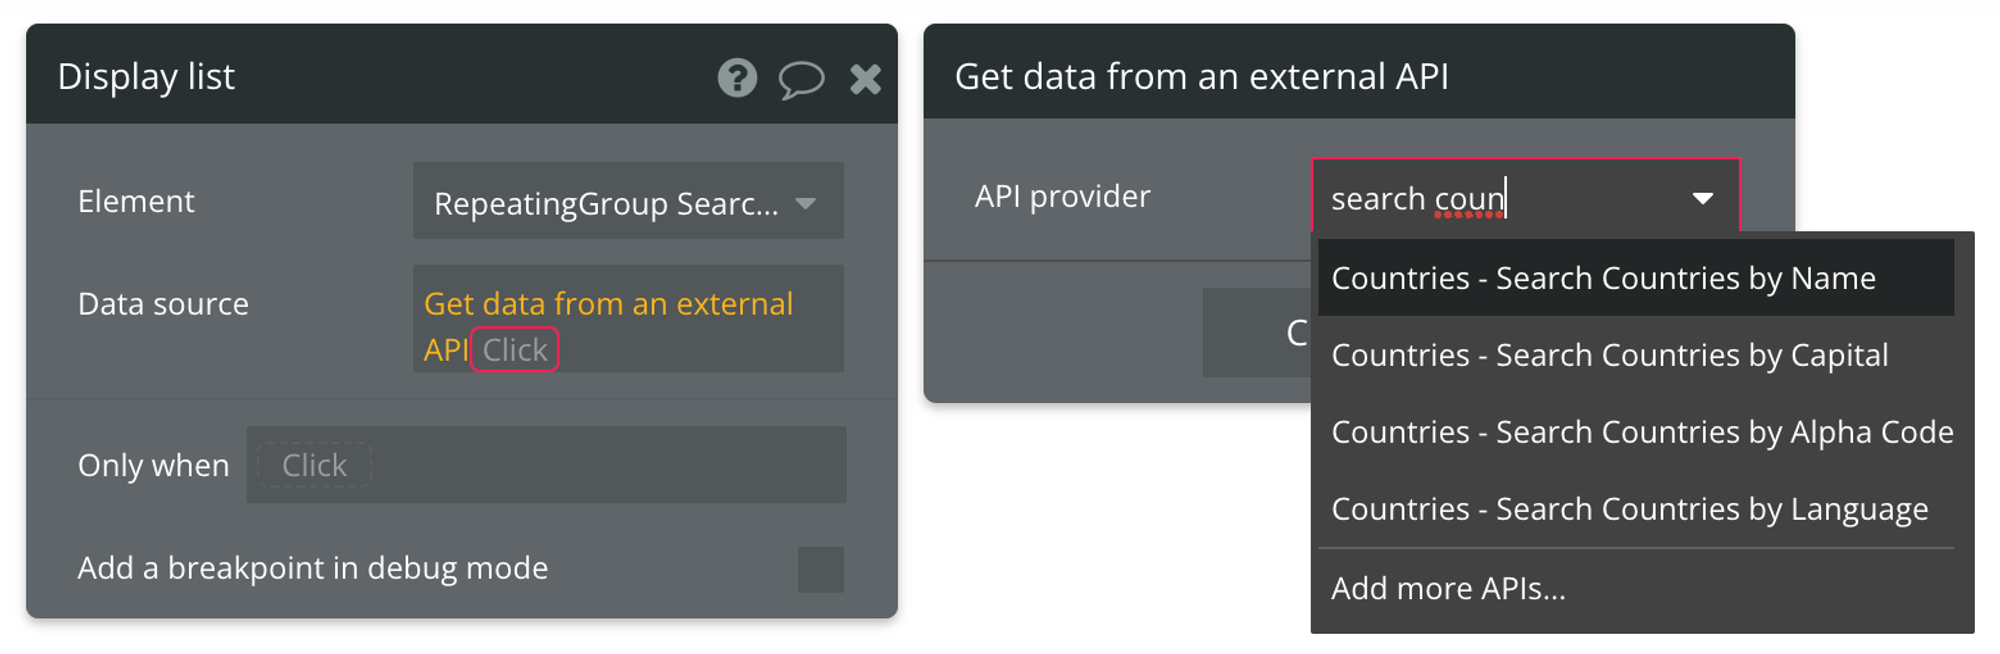 Select "Get data from external API" from the list of data sources, then find Countries - Search Countries by Name from the list of API providers